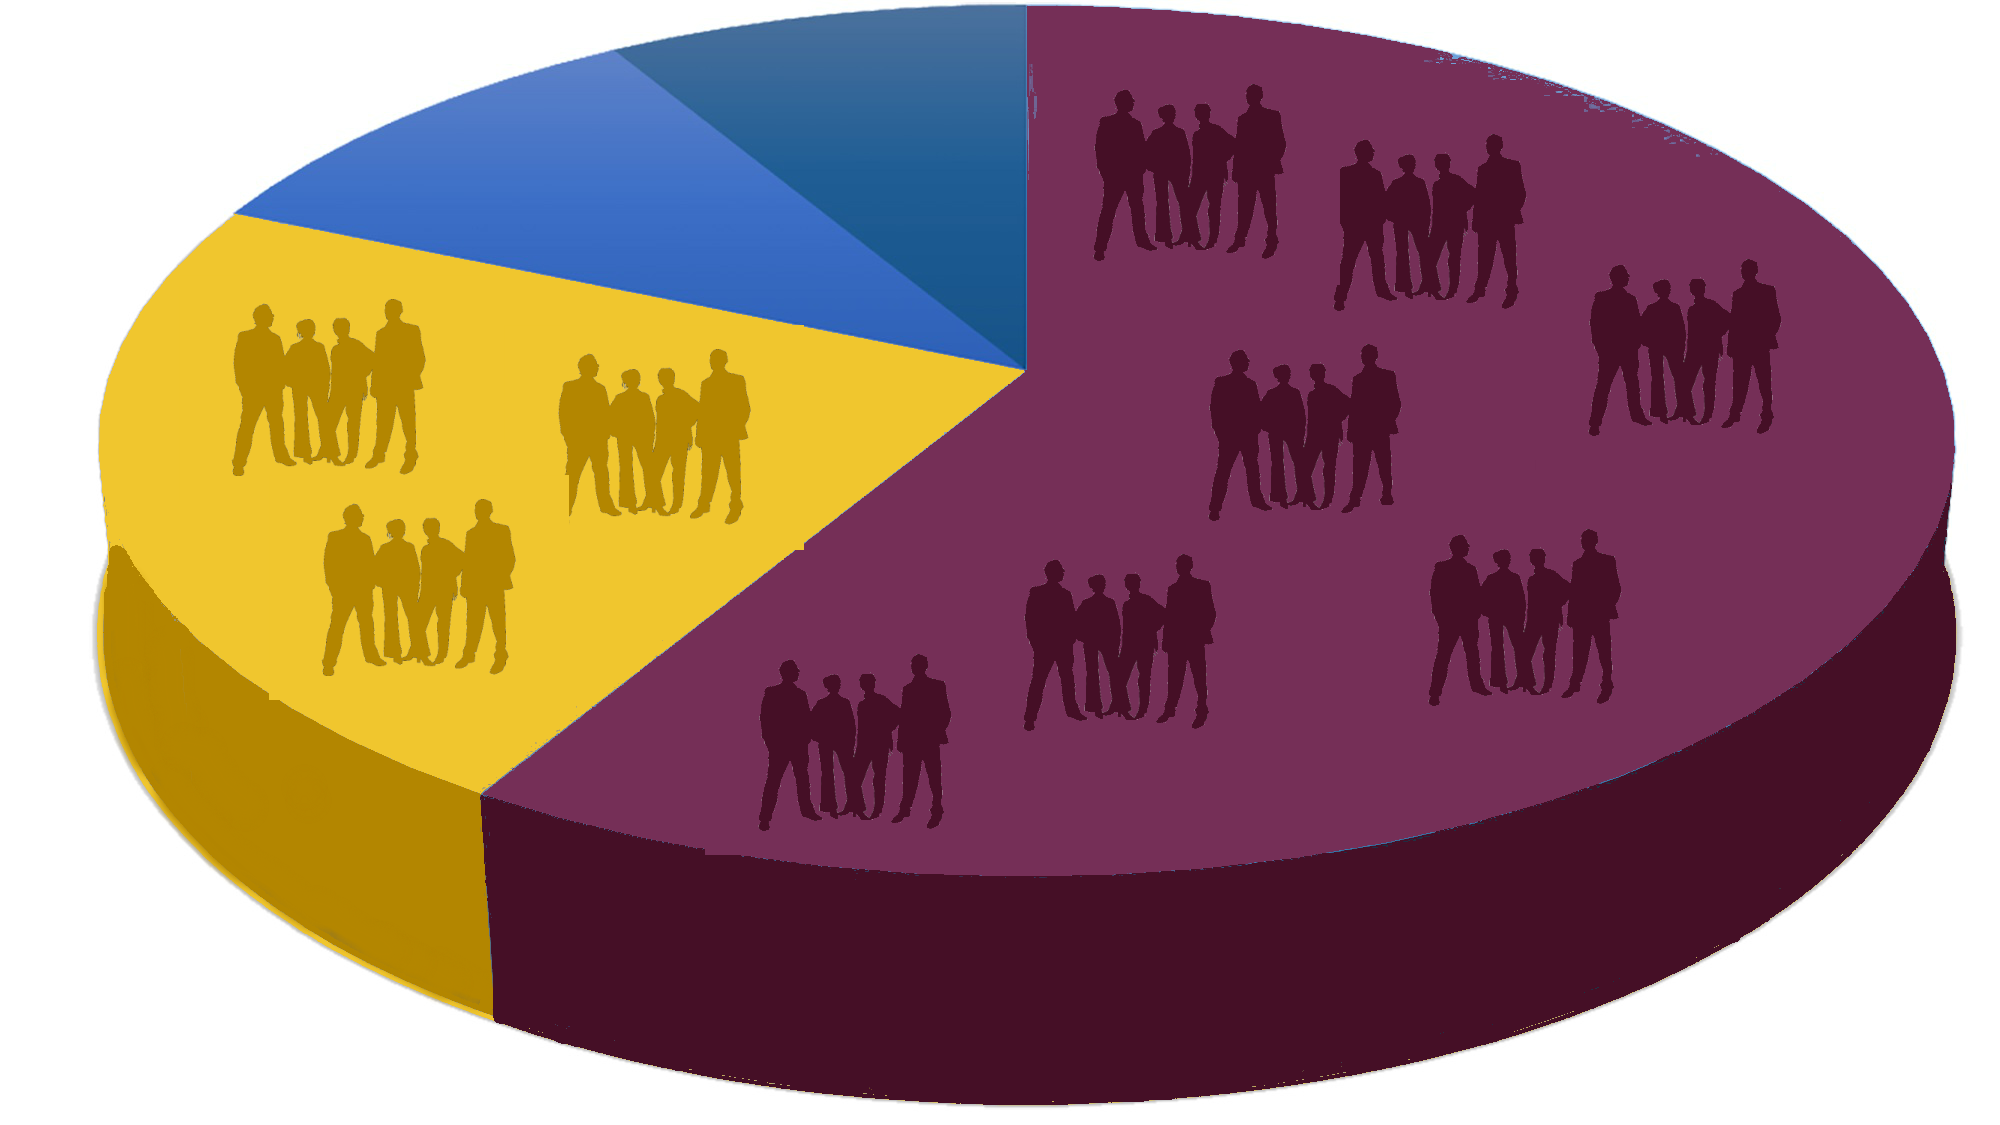 Pie chart depicting market share